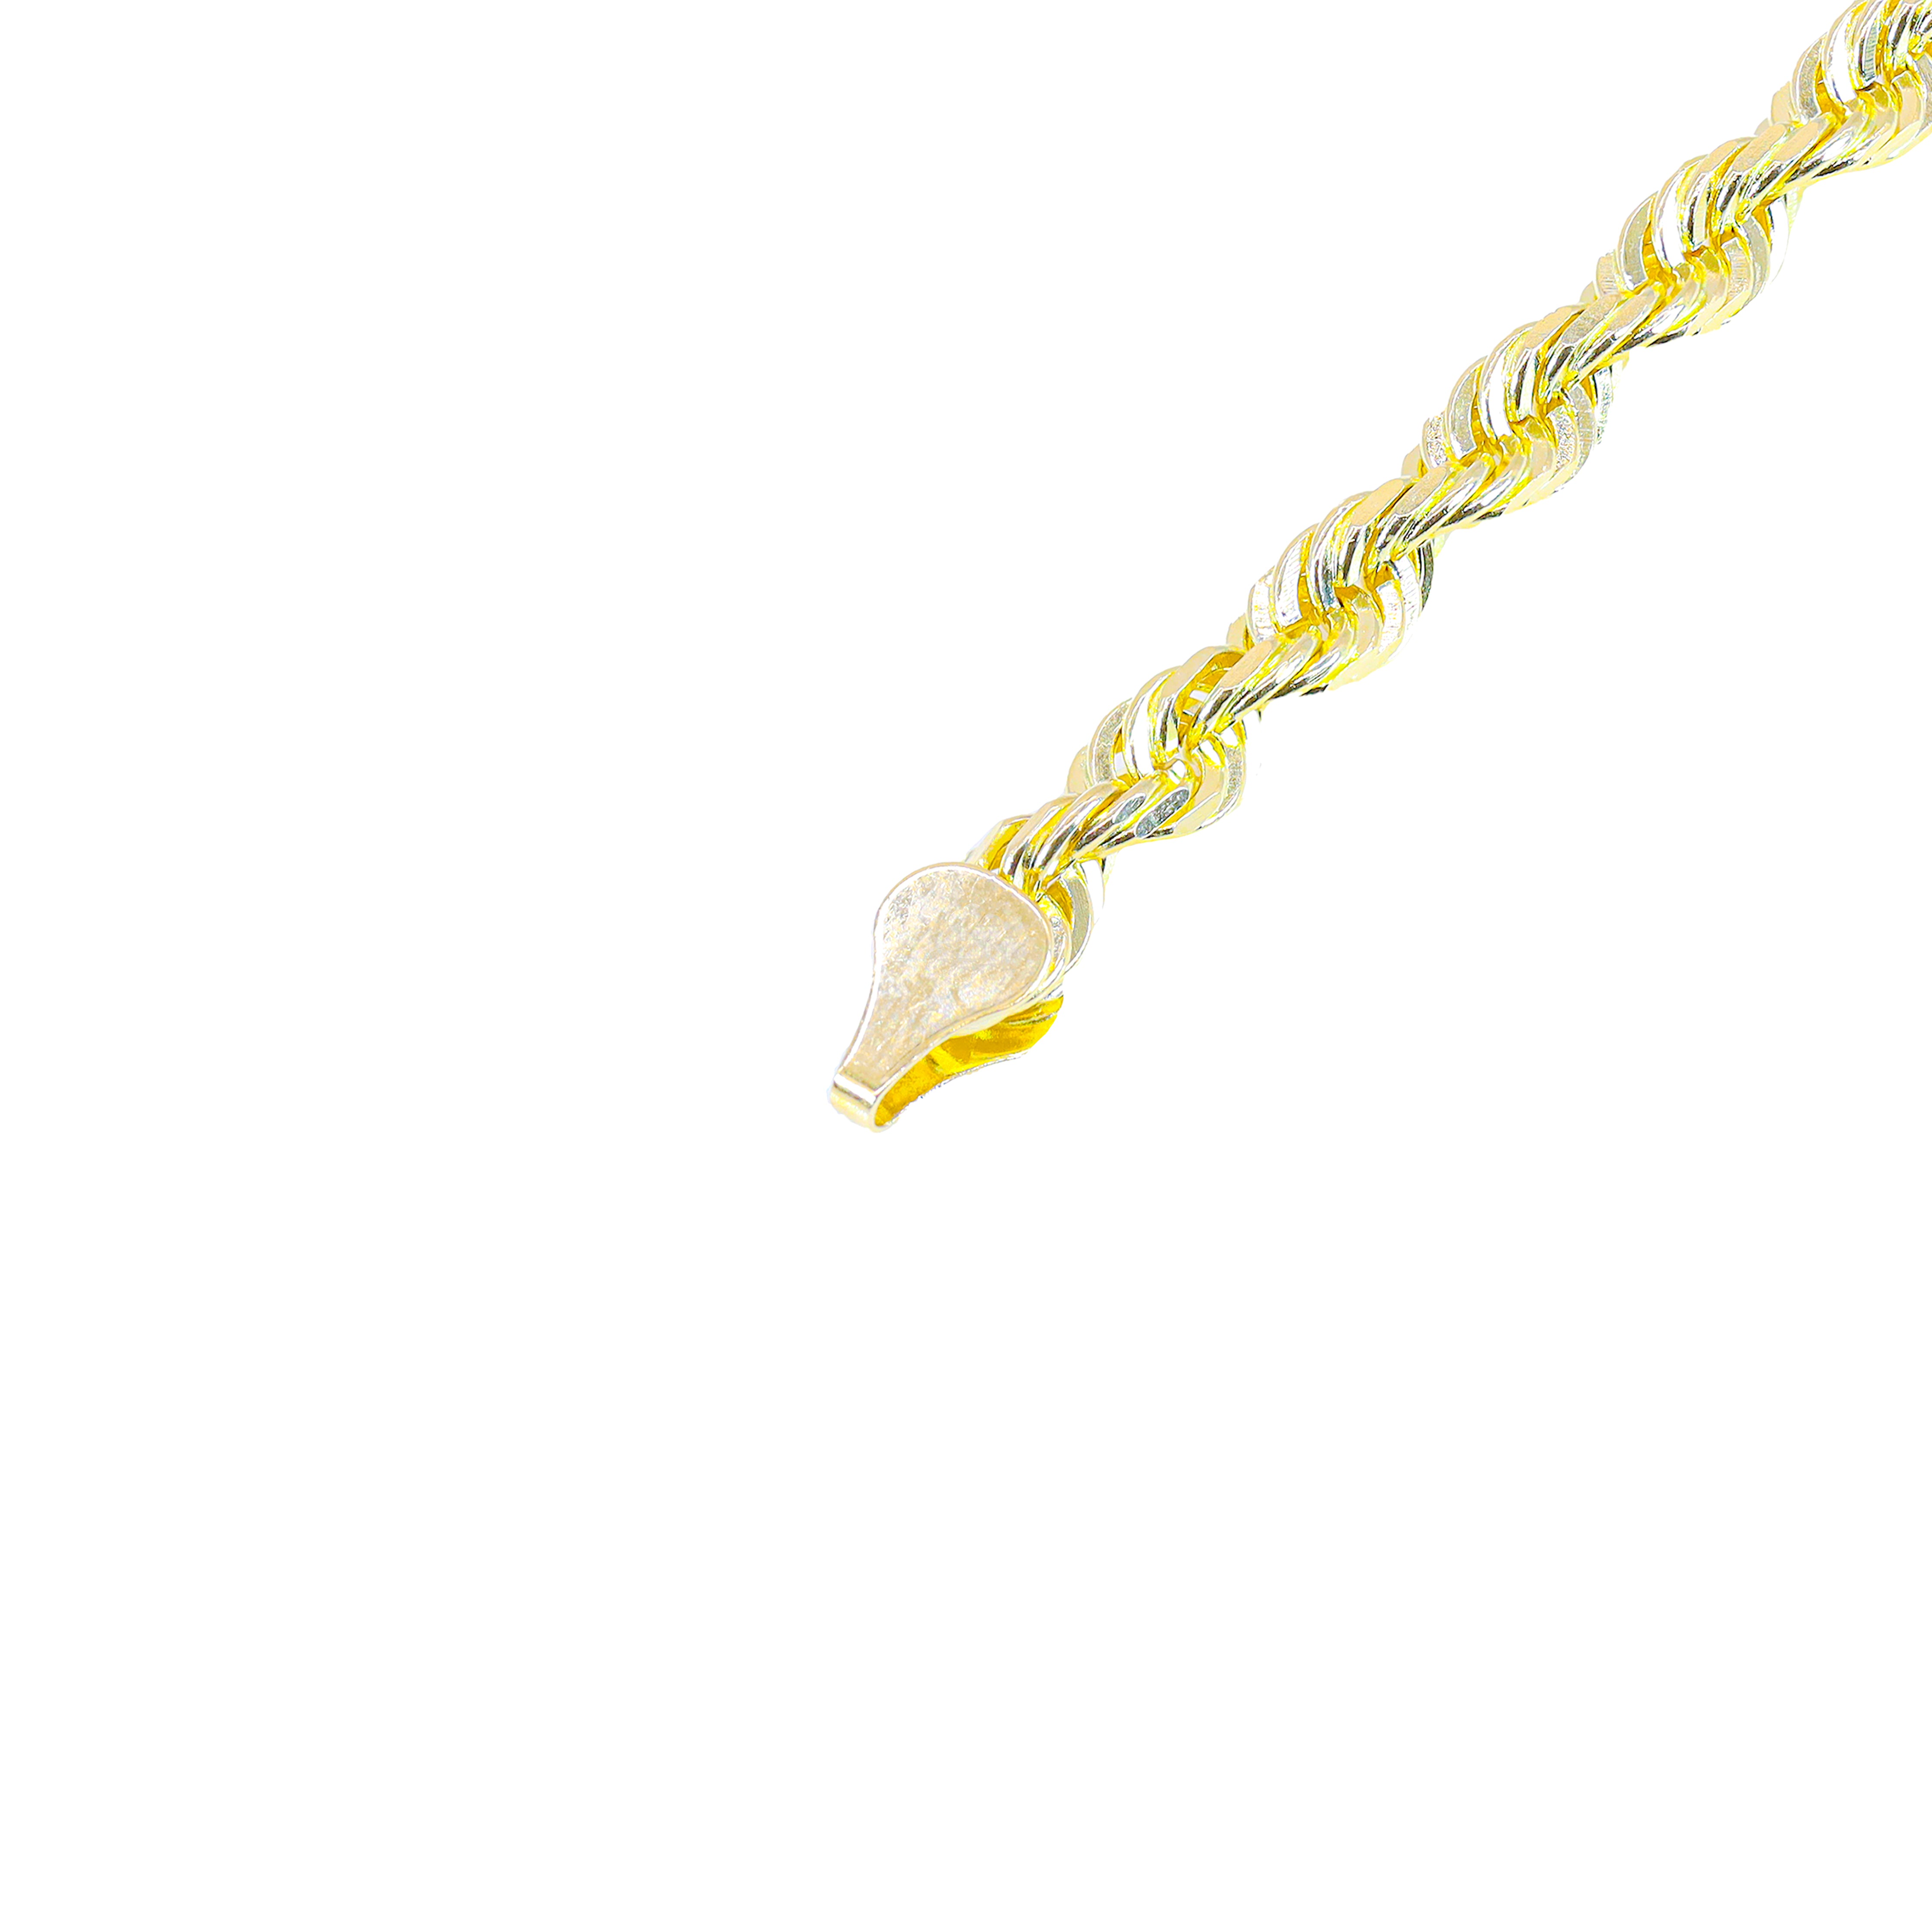 10KT Yellow Gold Semi-Solid Rope Bracelet